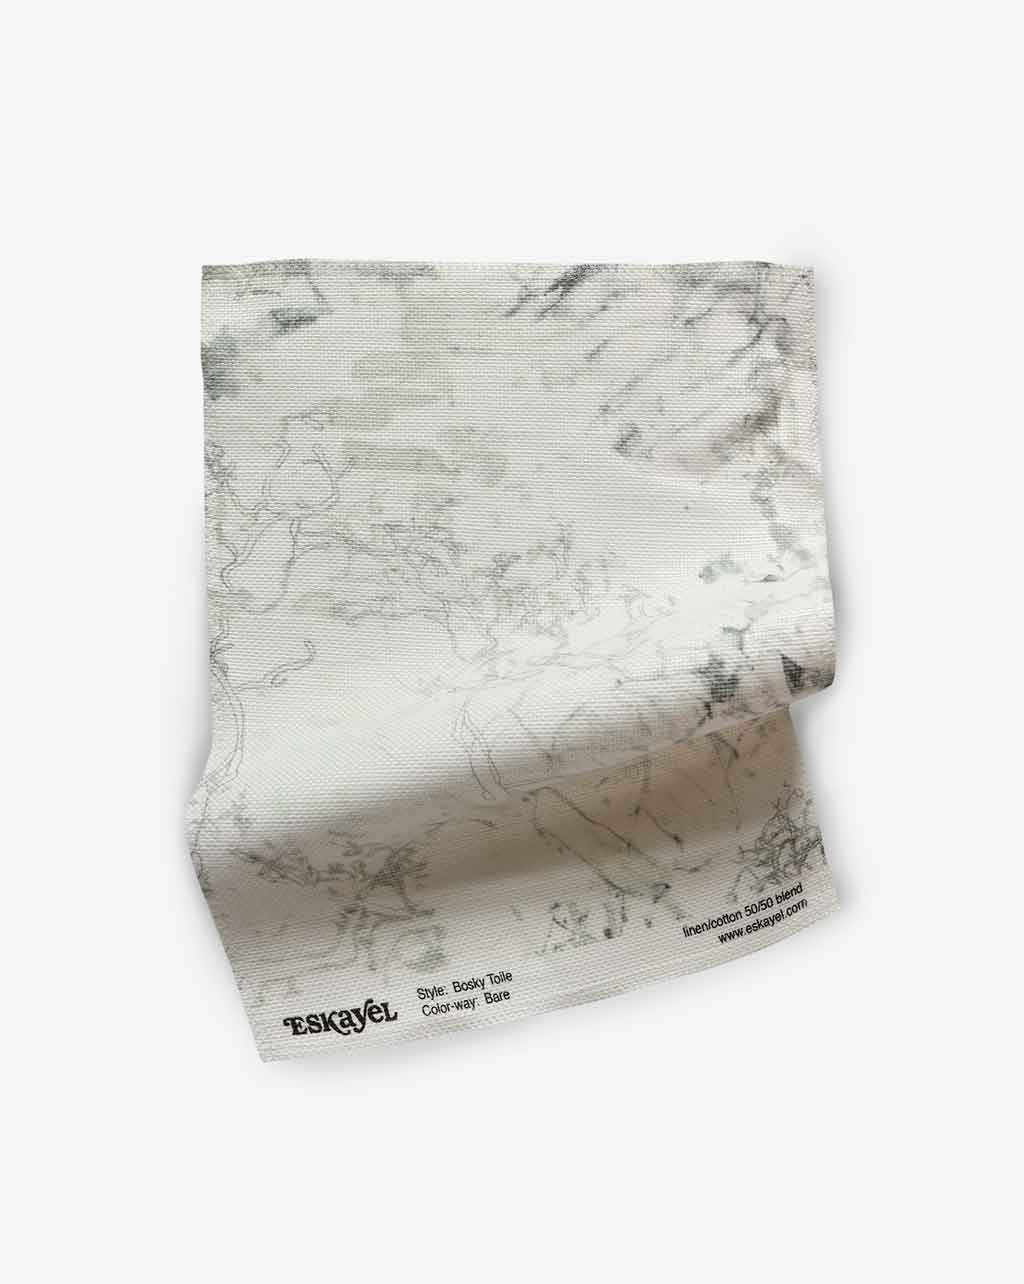 A white piece of Bosky Toile Fabric Sample Bare with a map on it is available for order